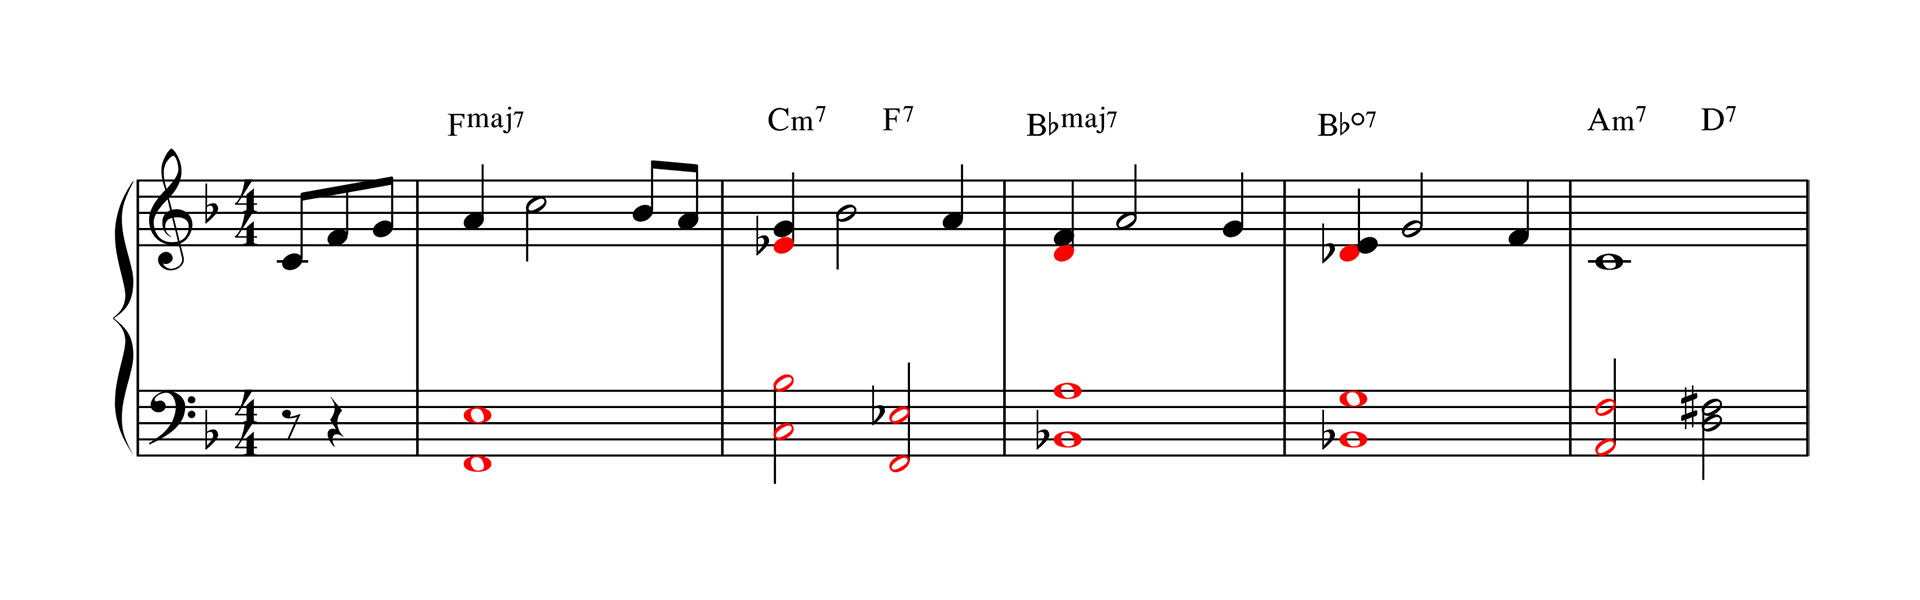 shell voicings with chord tones 3 and 7